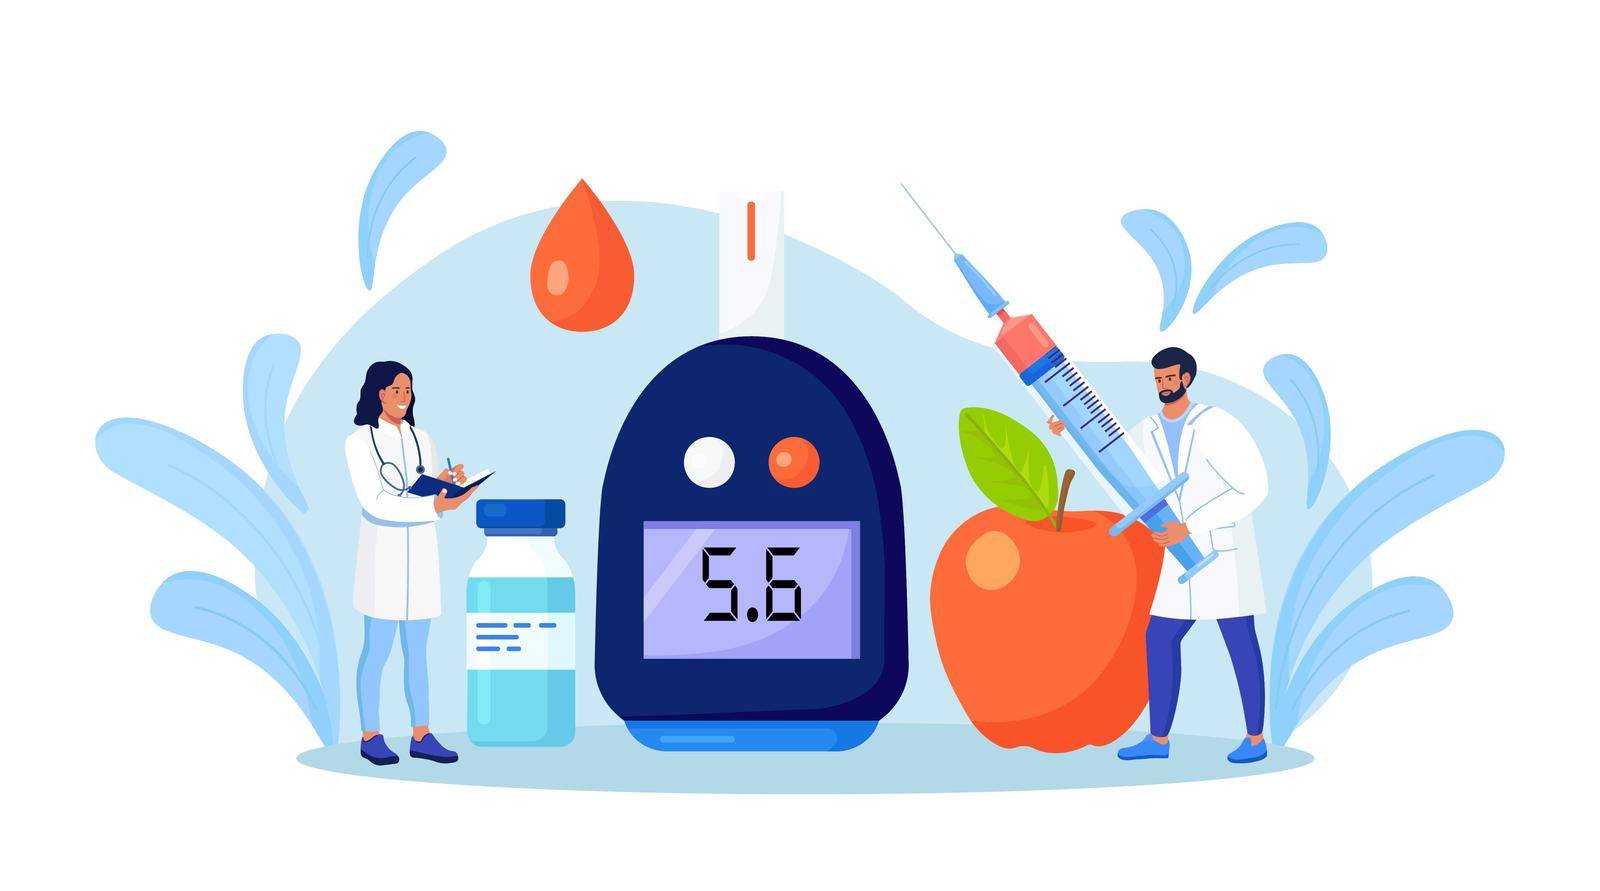 Doctors testing blood for glucose, using glucometer for hypoglycemia or diabetes diagnosis. Laboratory equipment and syringe. Physician measuring sugar level by TanushkaBu